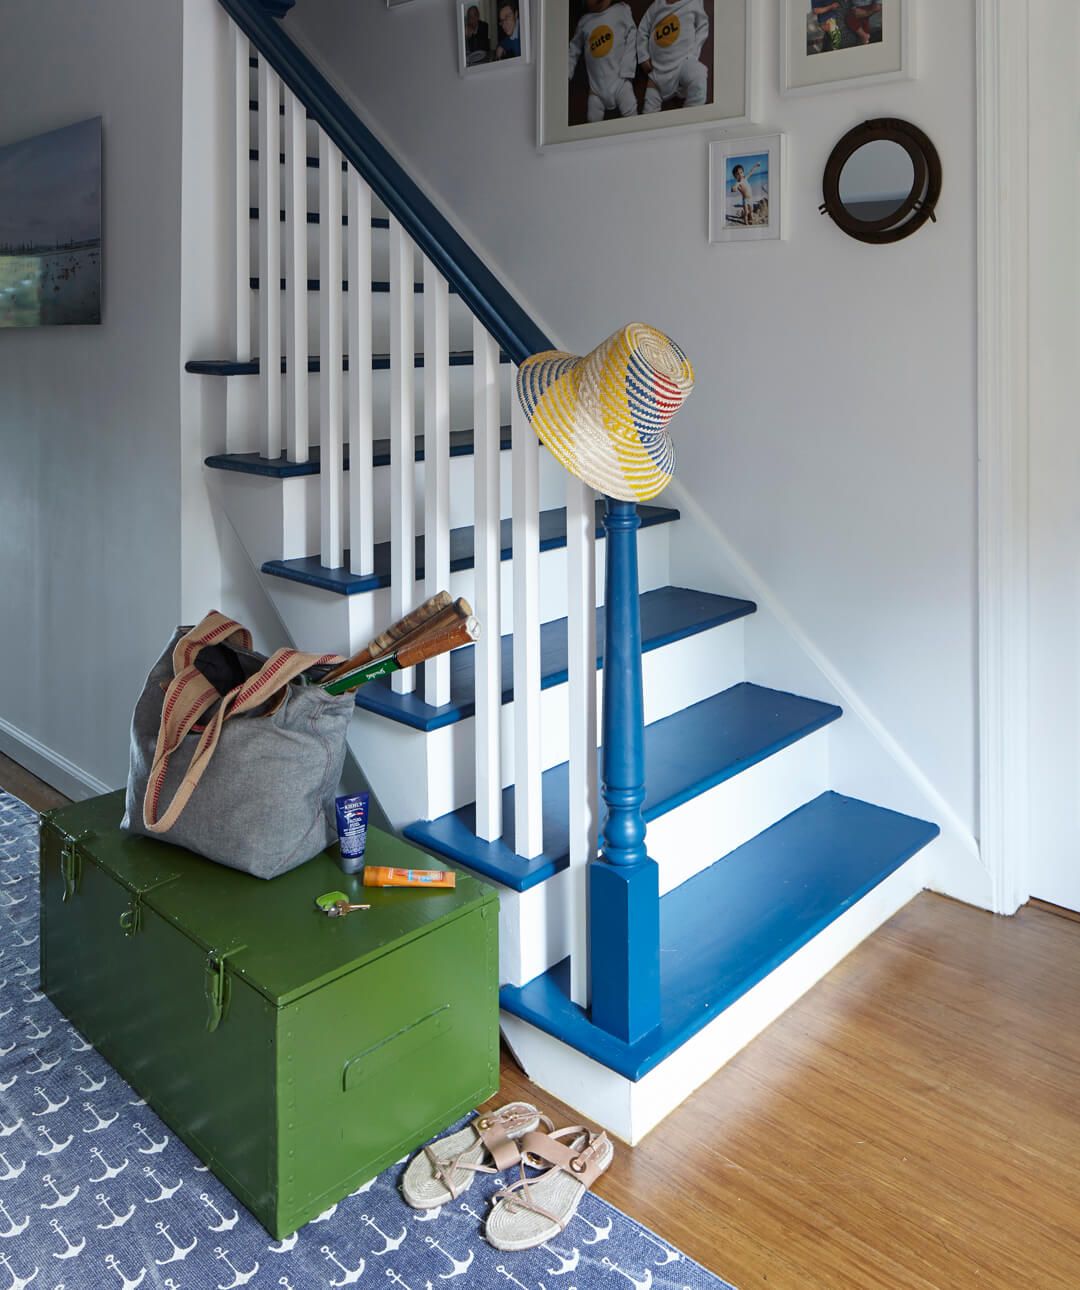 How To Paint Stairs - The Right Way To Paint Stairs